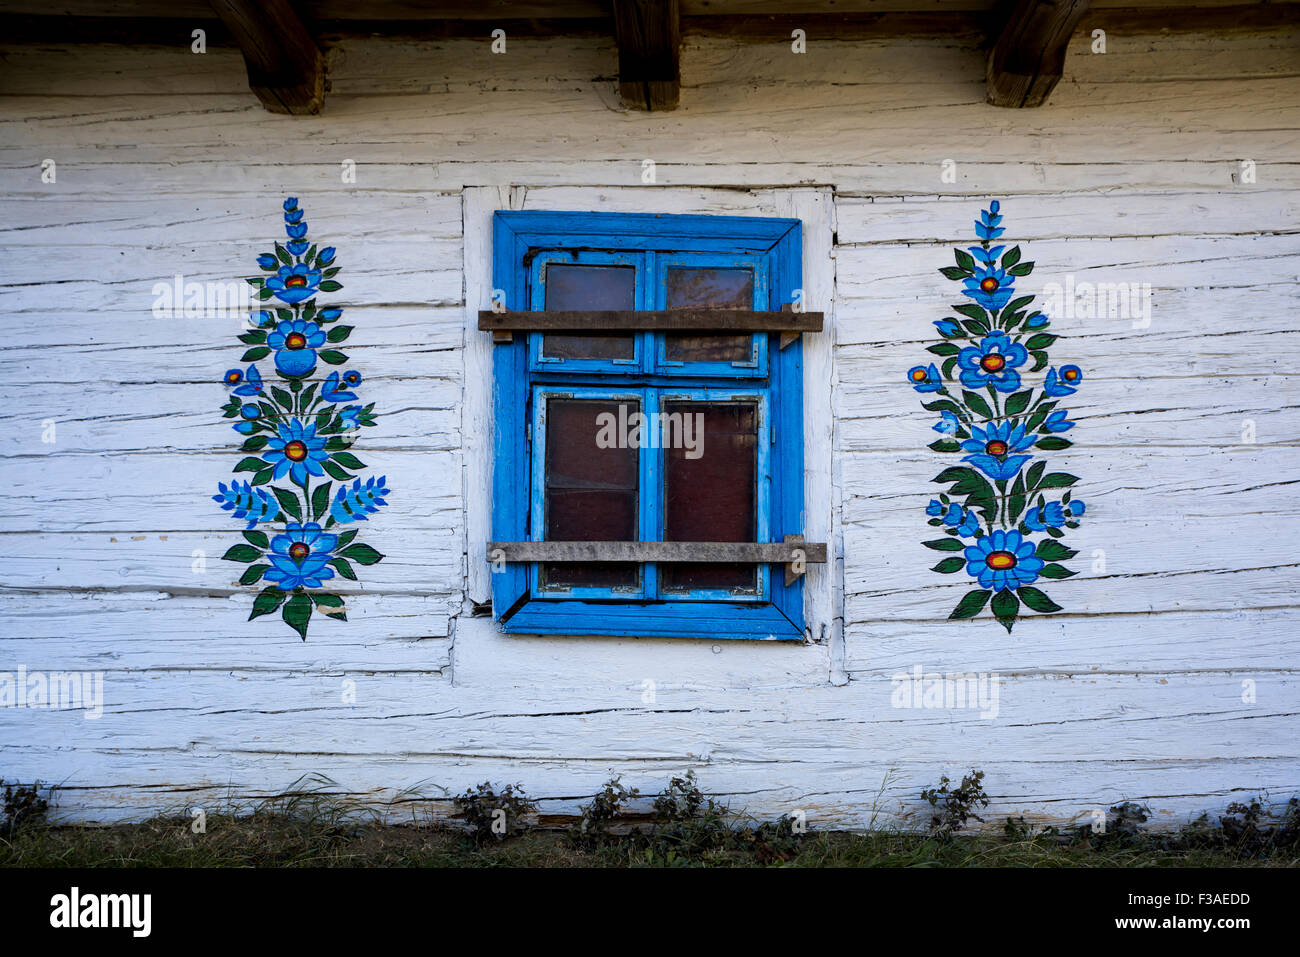 Floral decorations on the facade of a typical wooden house in the village of Zalipie in poland Stock Photo